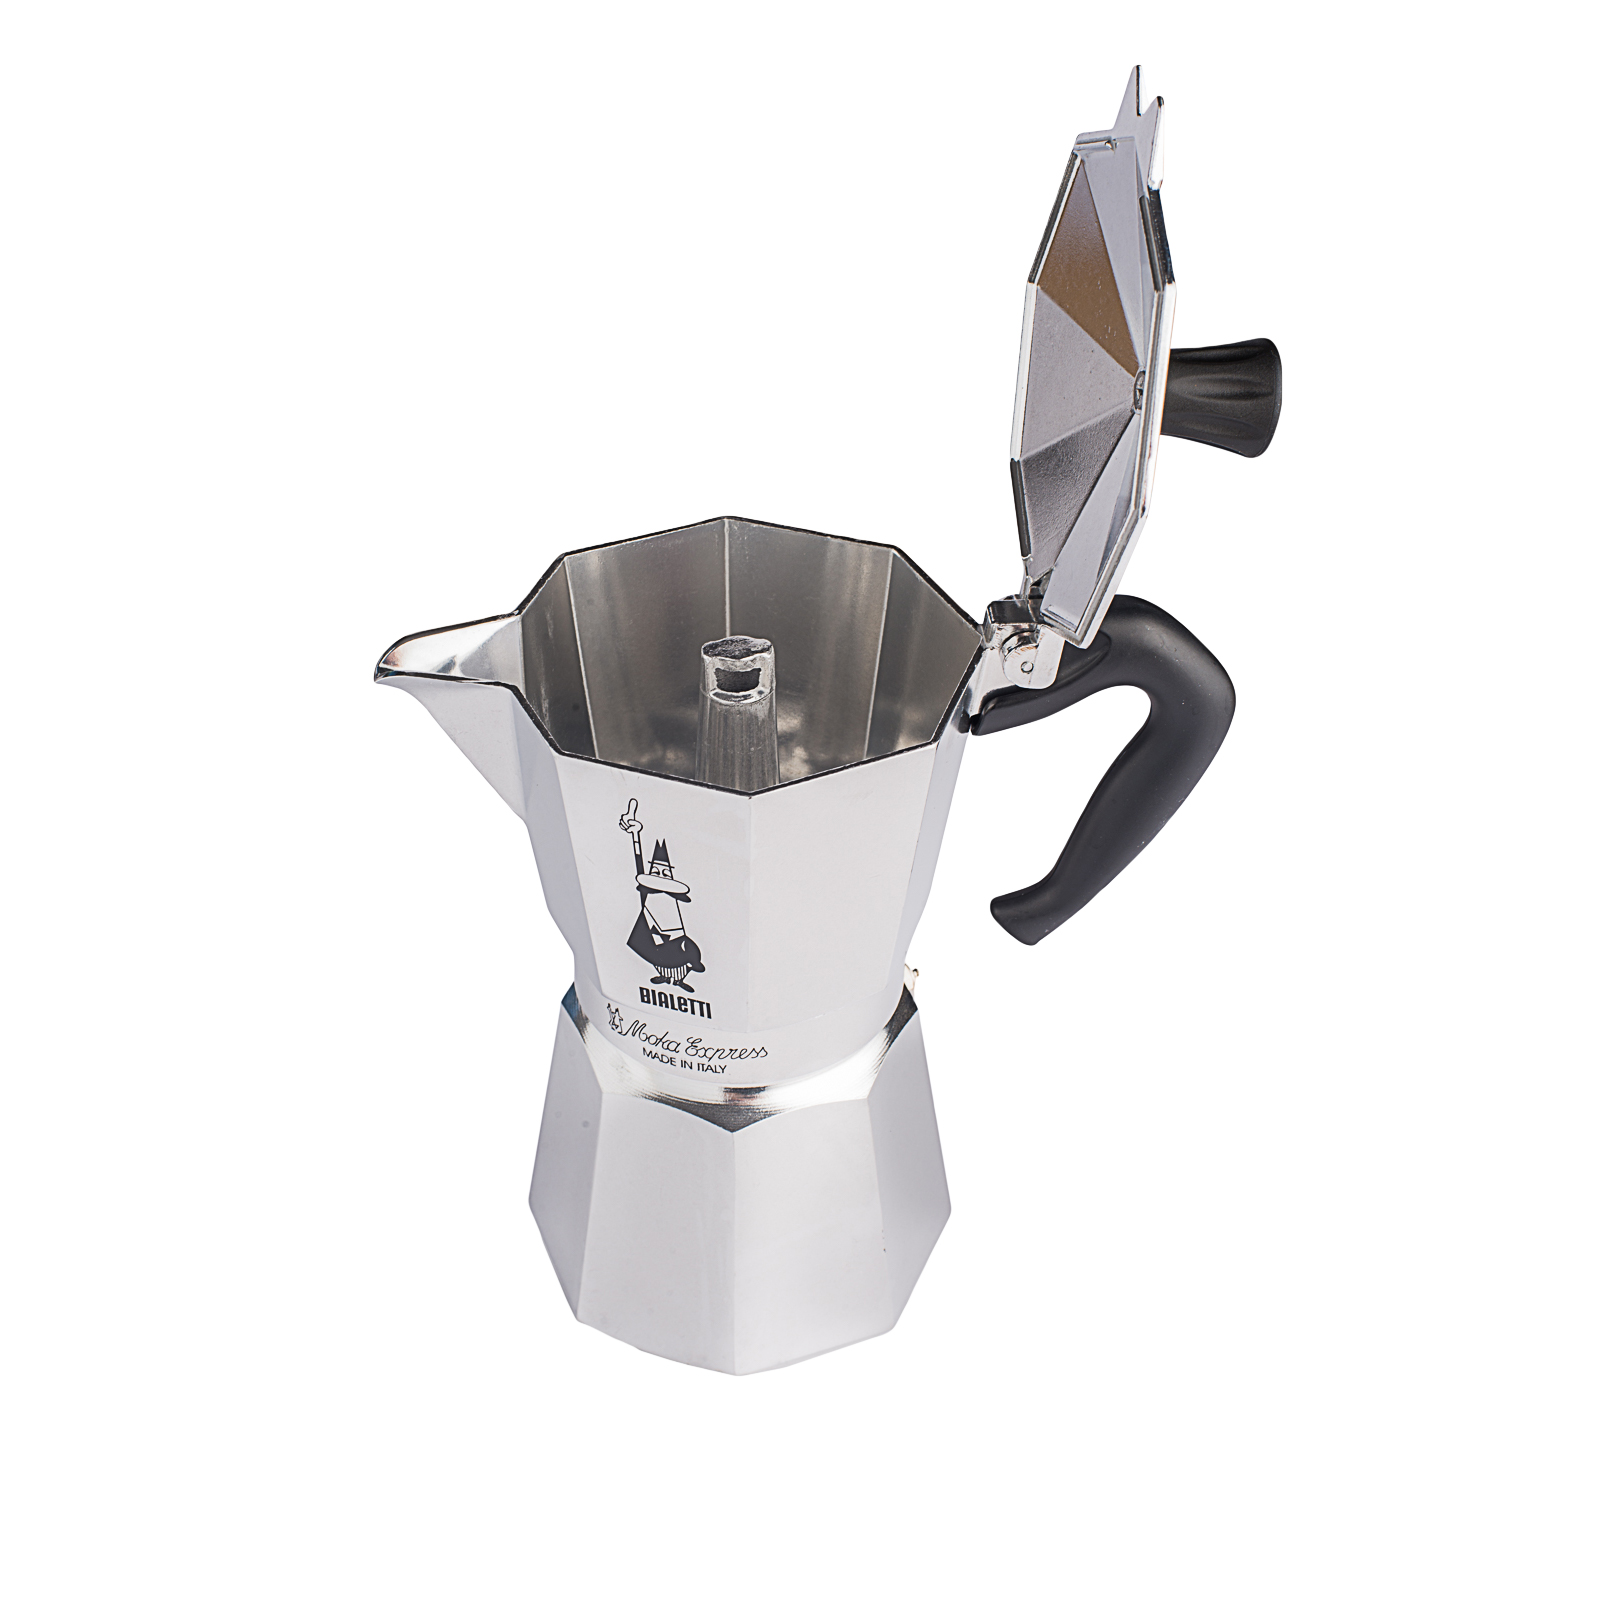 Bialetti Moka Express (6-Cup) Review - Specs, Capacity, Brew Time